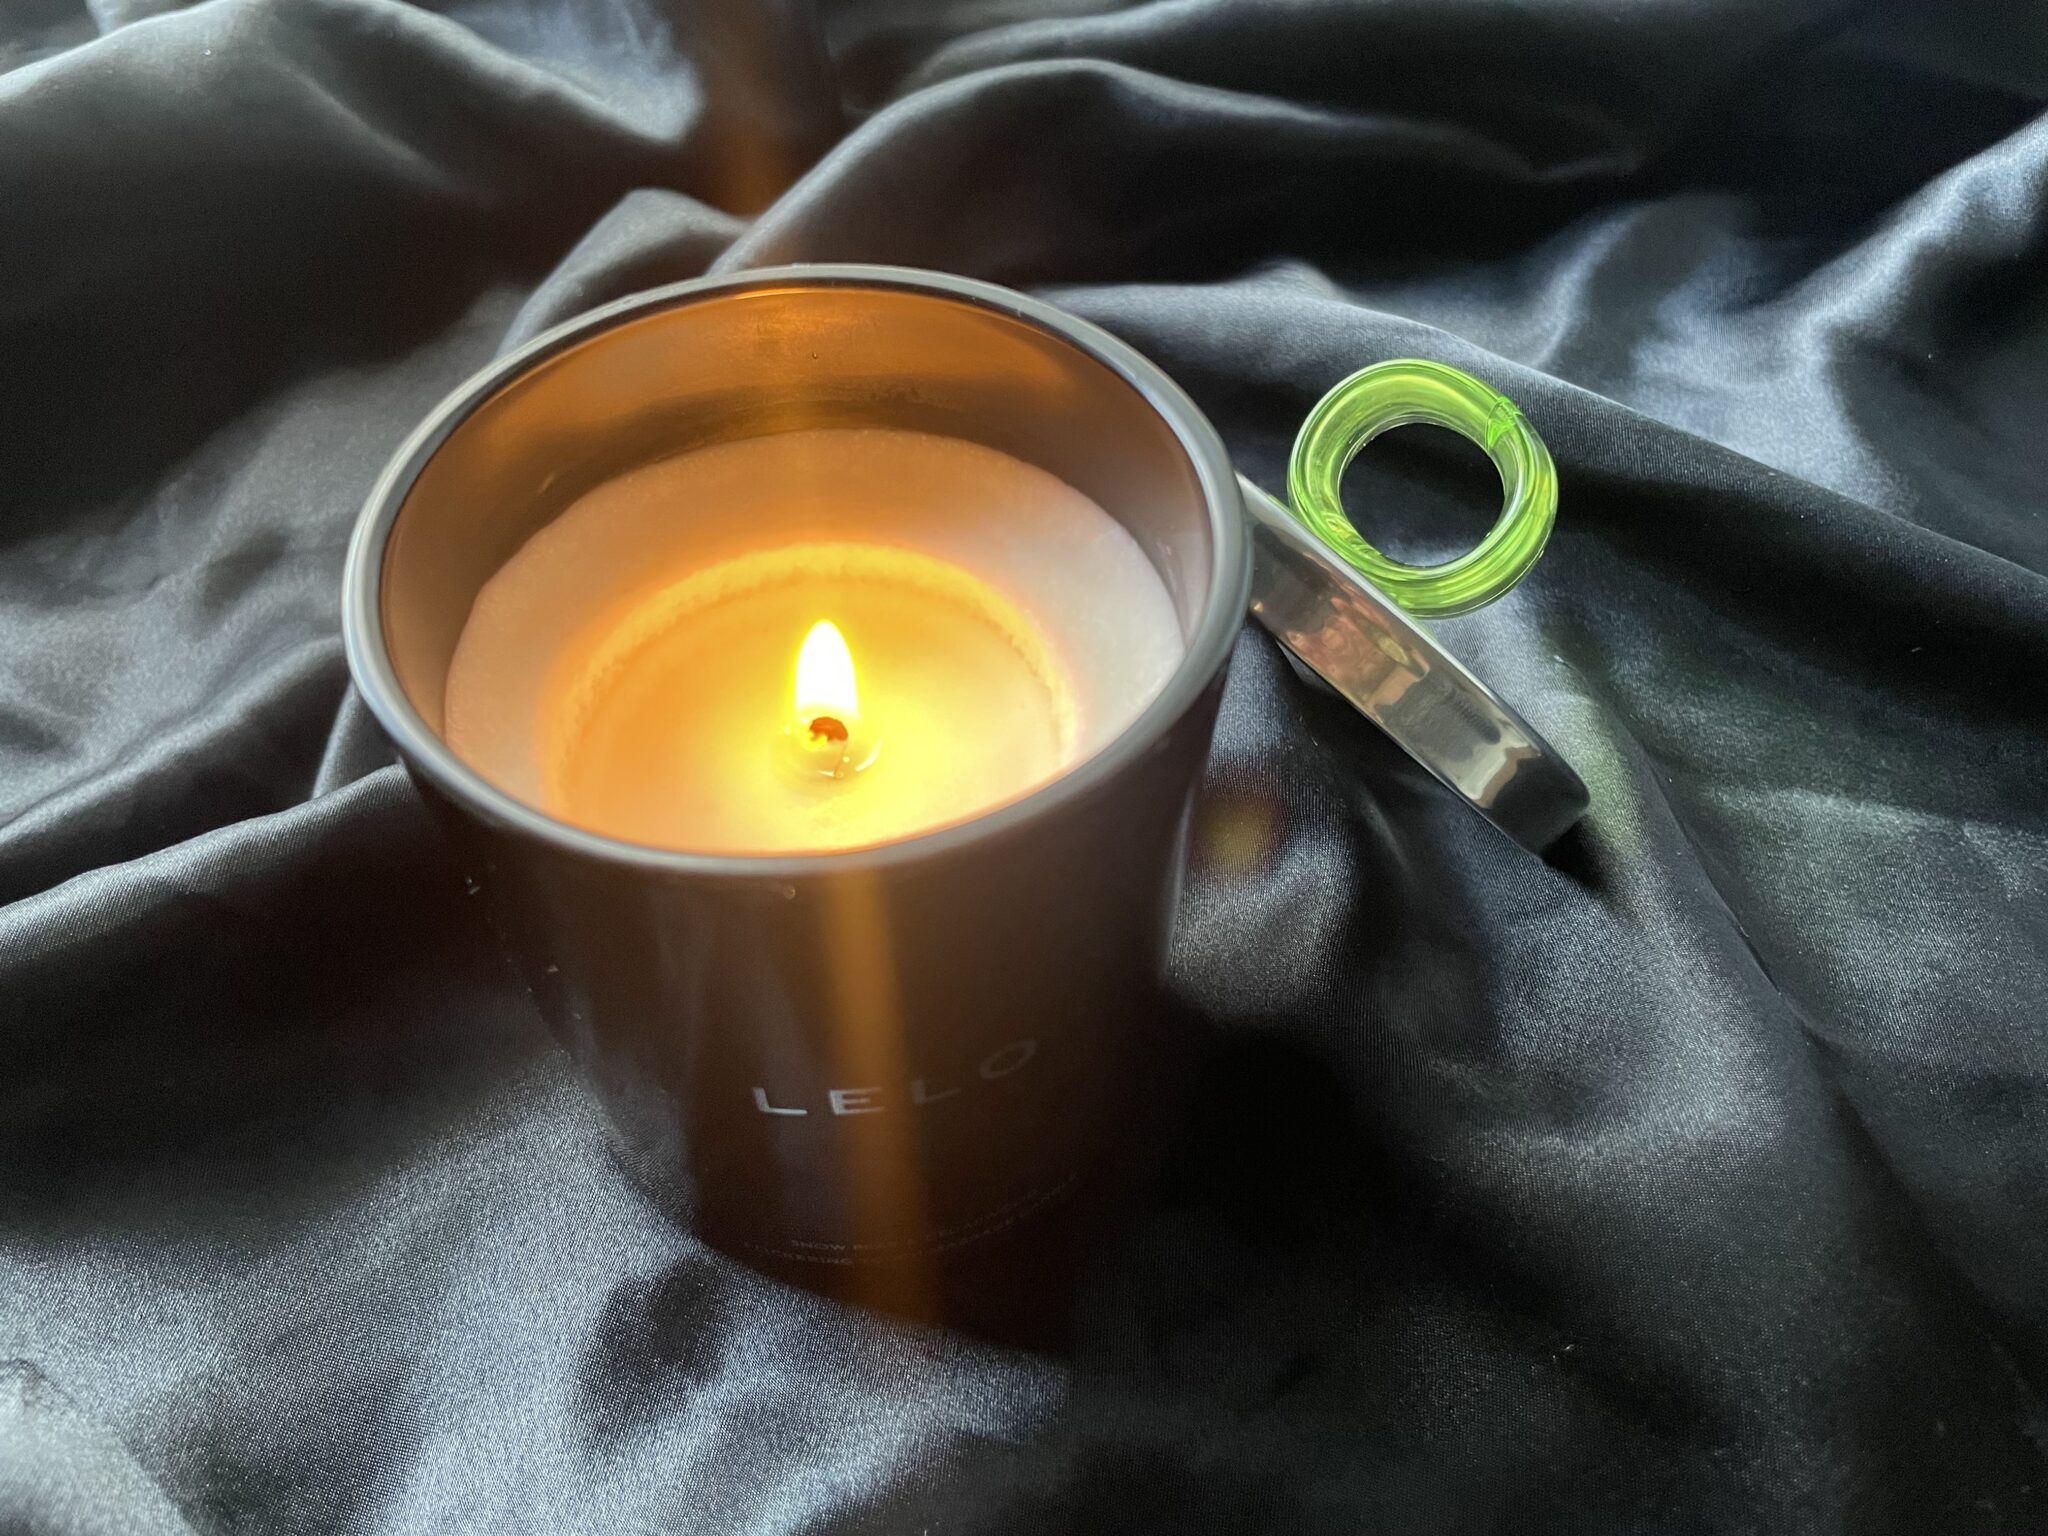 LELO Flickering Touch Massage Candle How Easy is the LELO Flickering Touch Massage Candle to Use? A Review